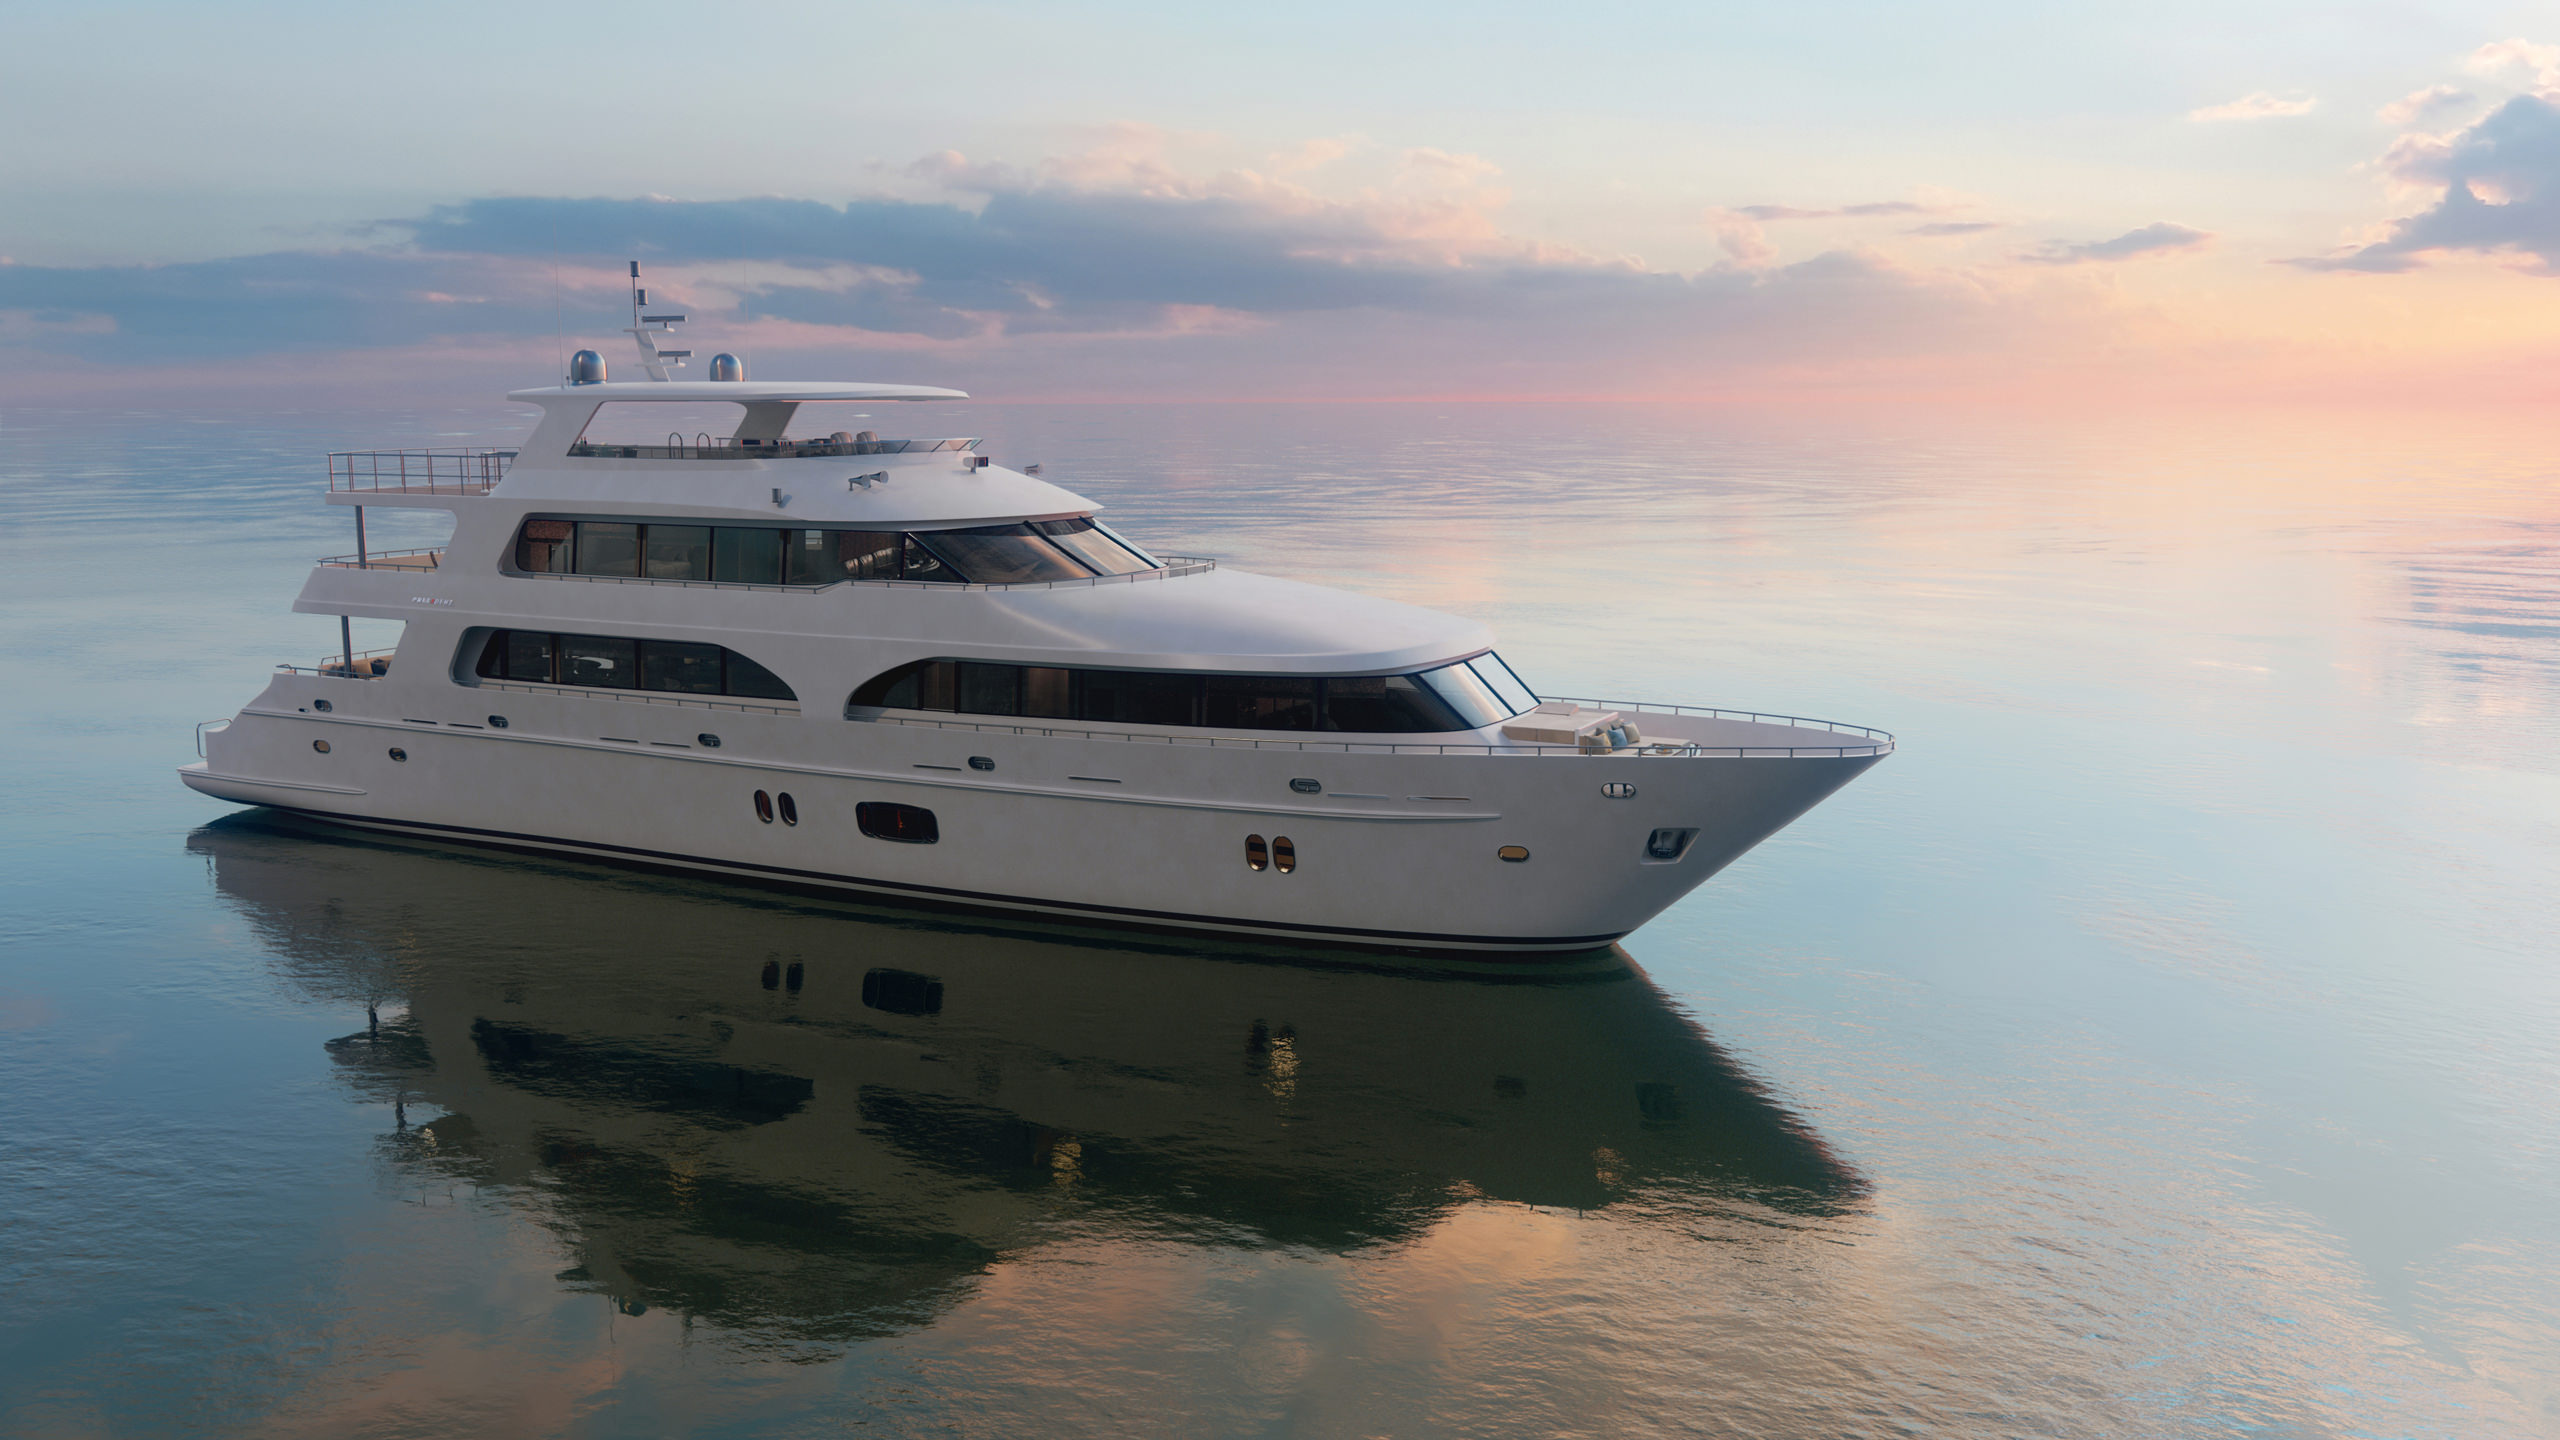 3D exterior visualization of the luxury president yacht in the calm sea at dawn